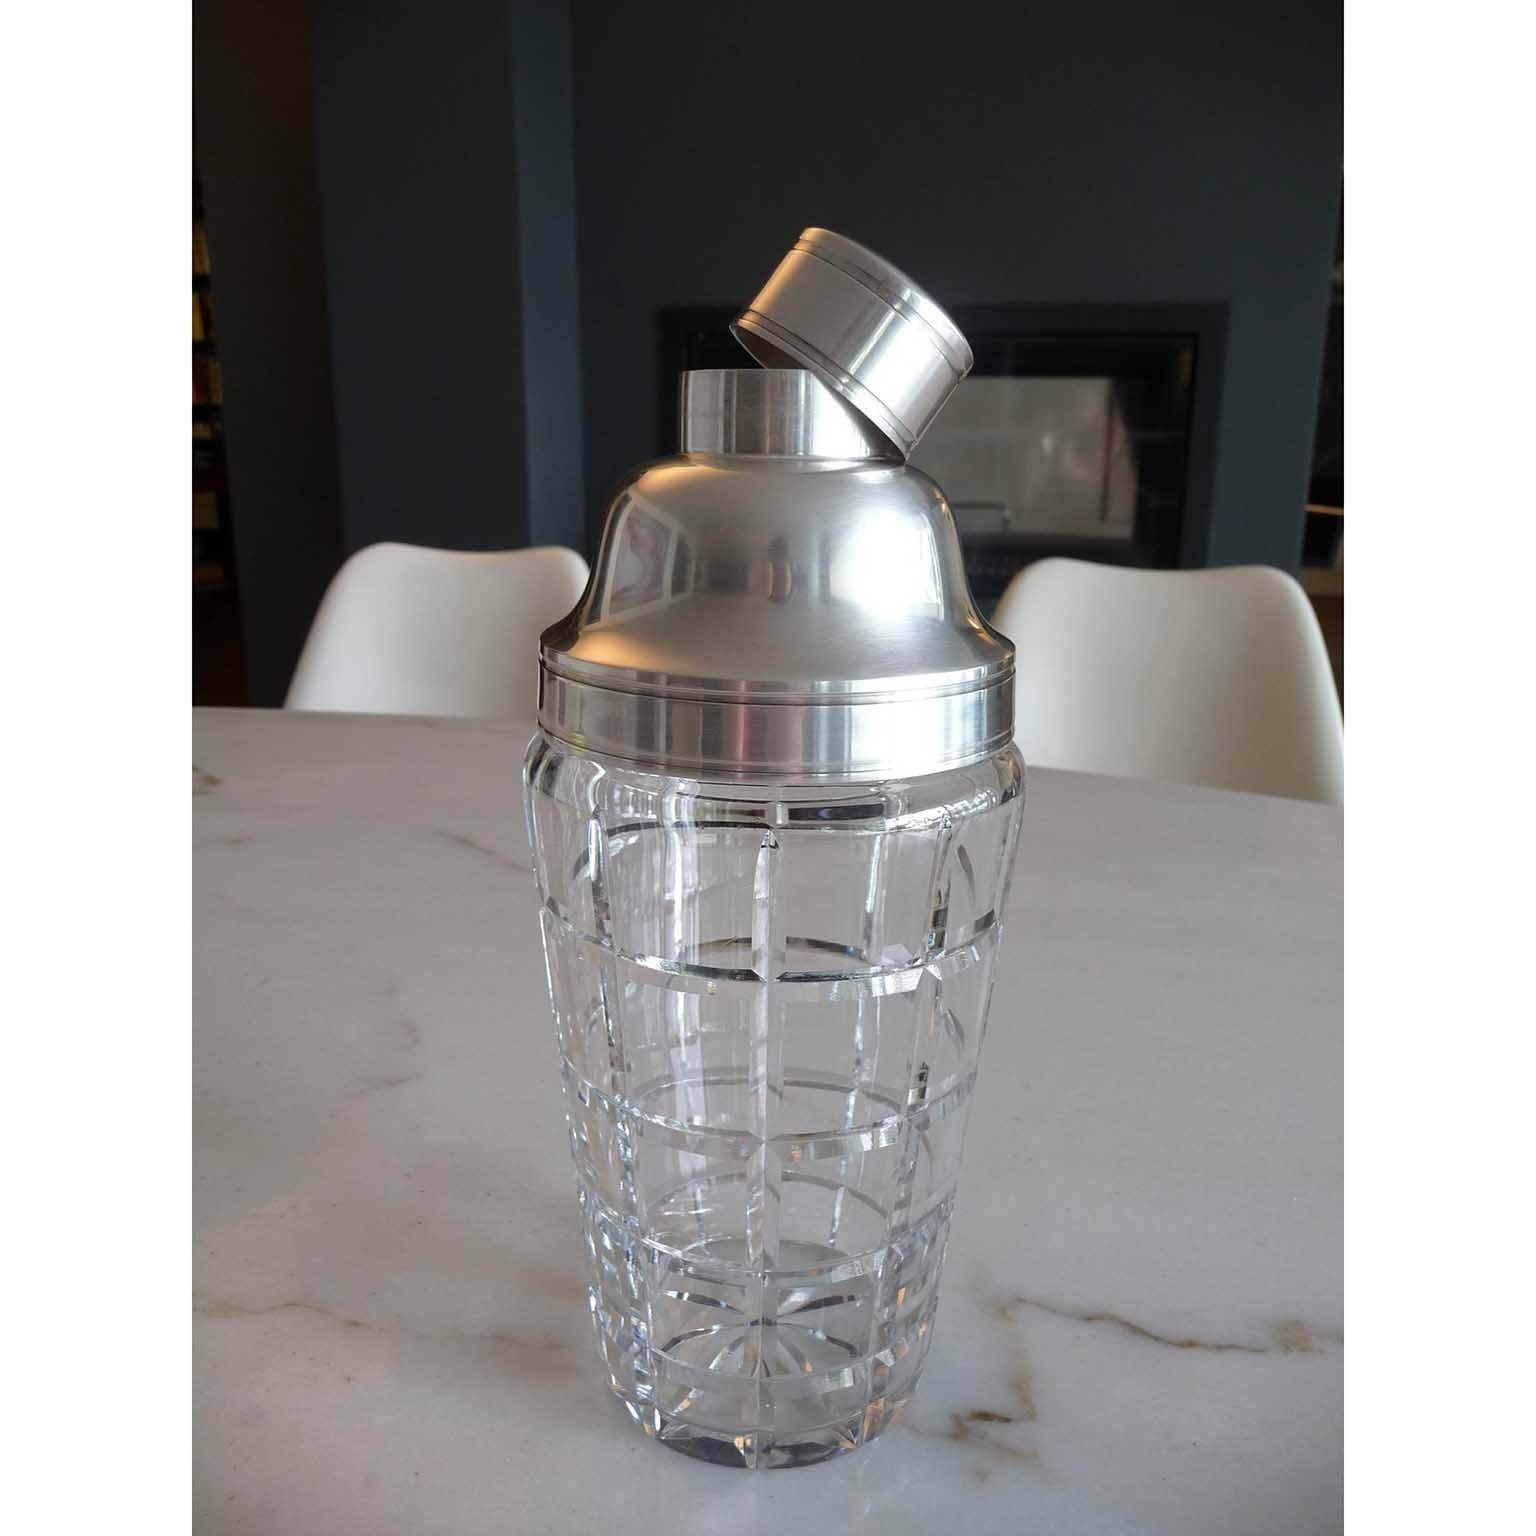 Silvered Art Deco Cocktail Shaker by Saglier Freres